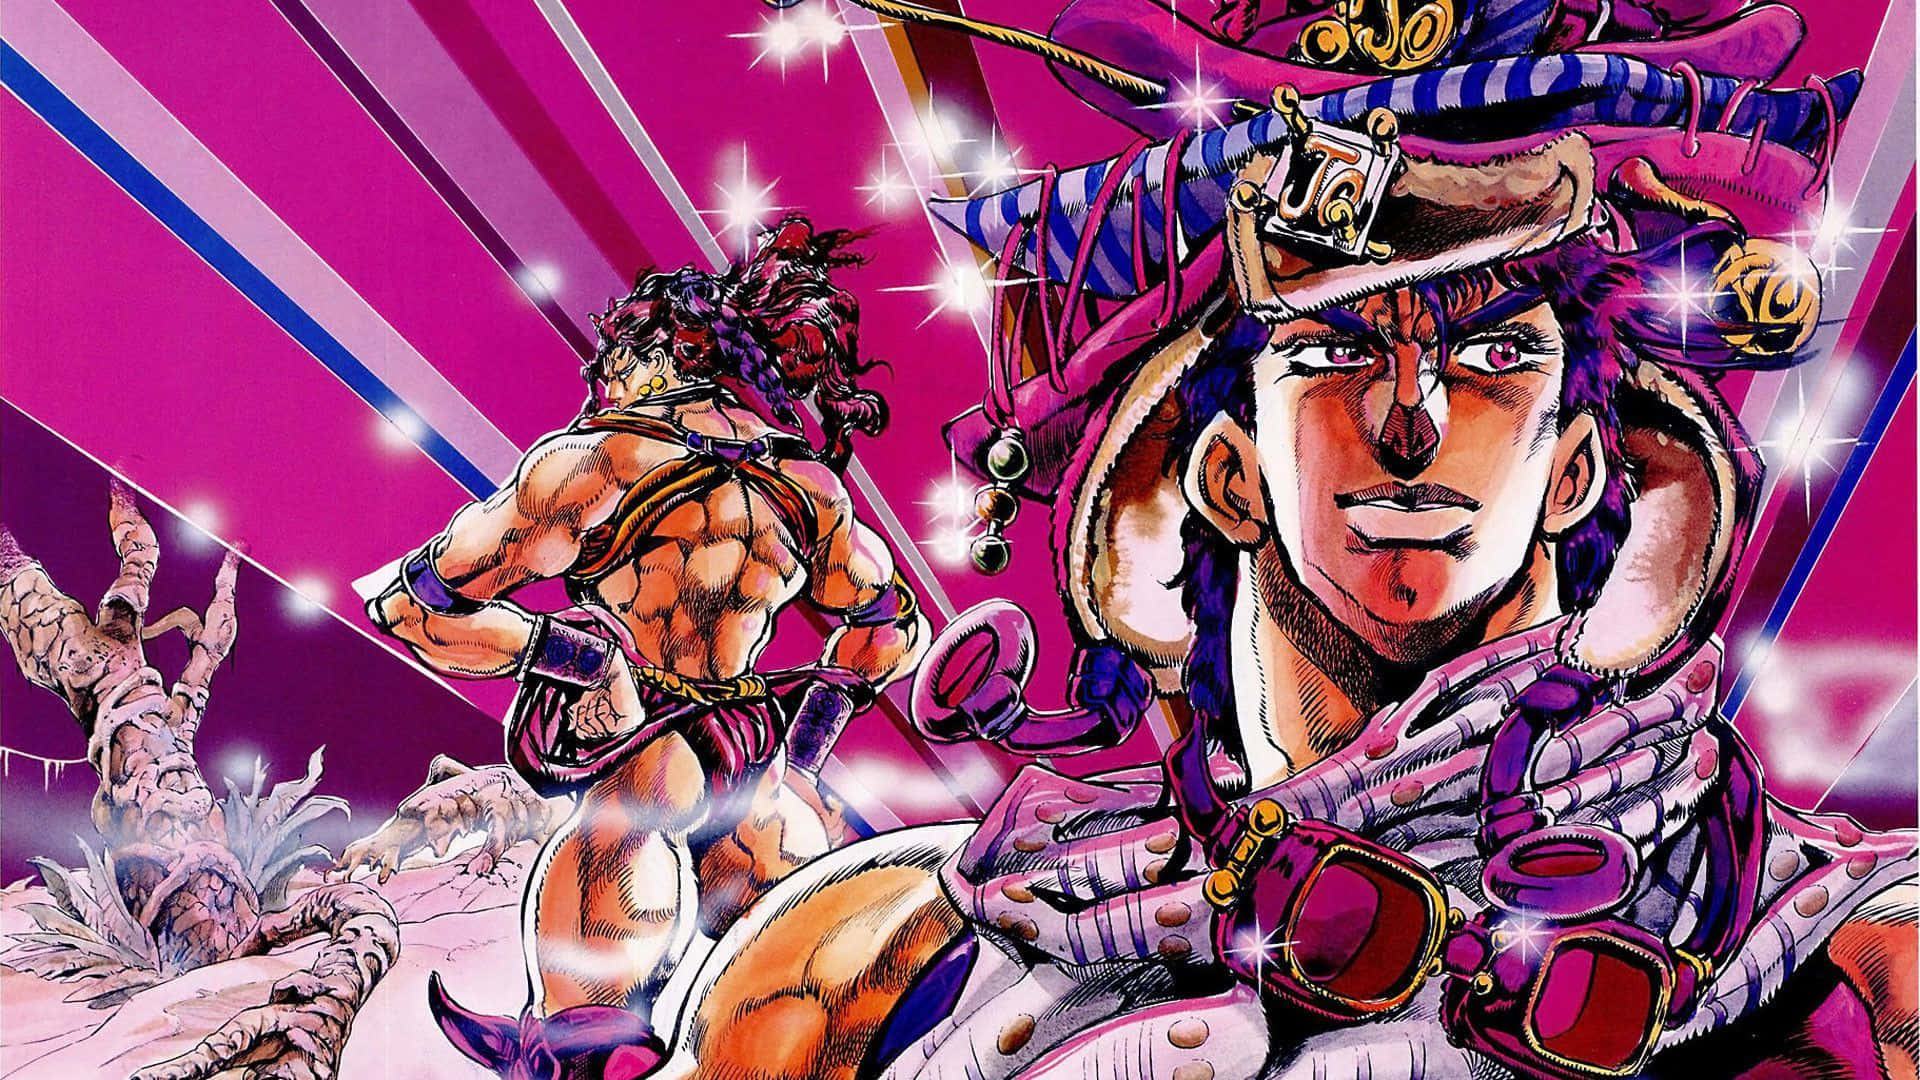 Download A Battle of Jojo Stands at their finest. Wallpaper